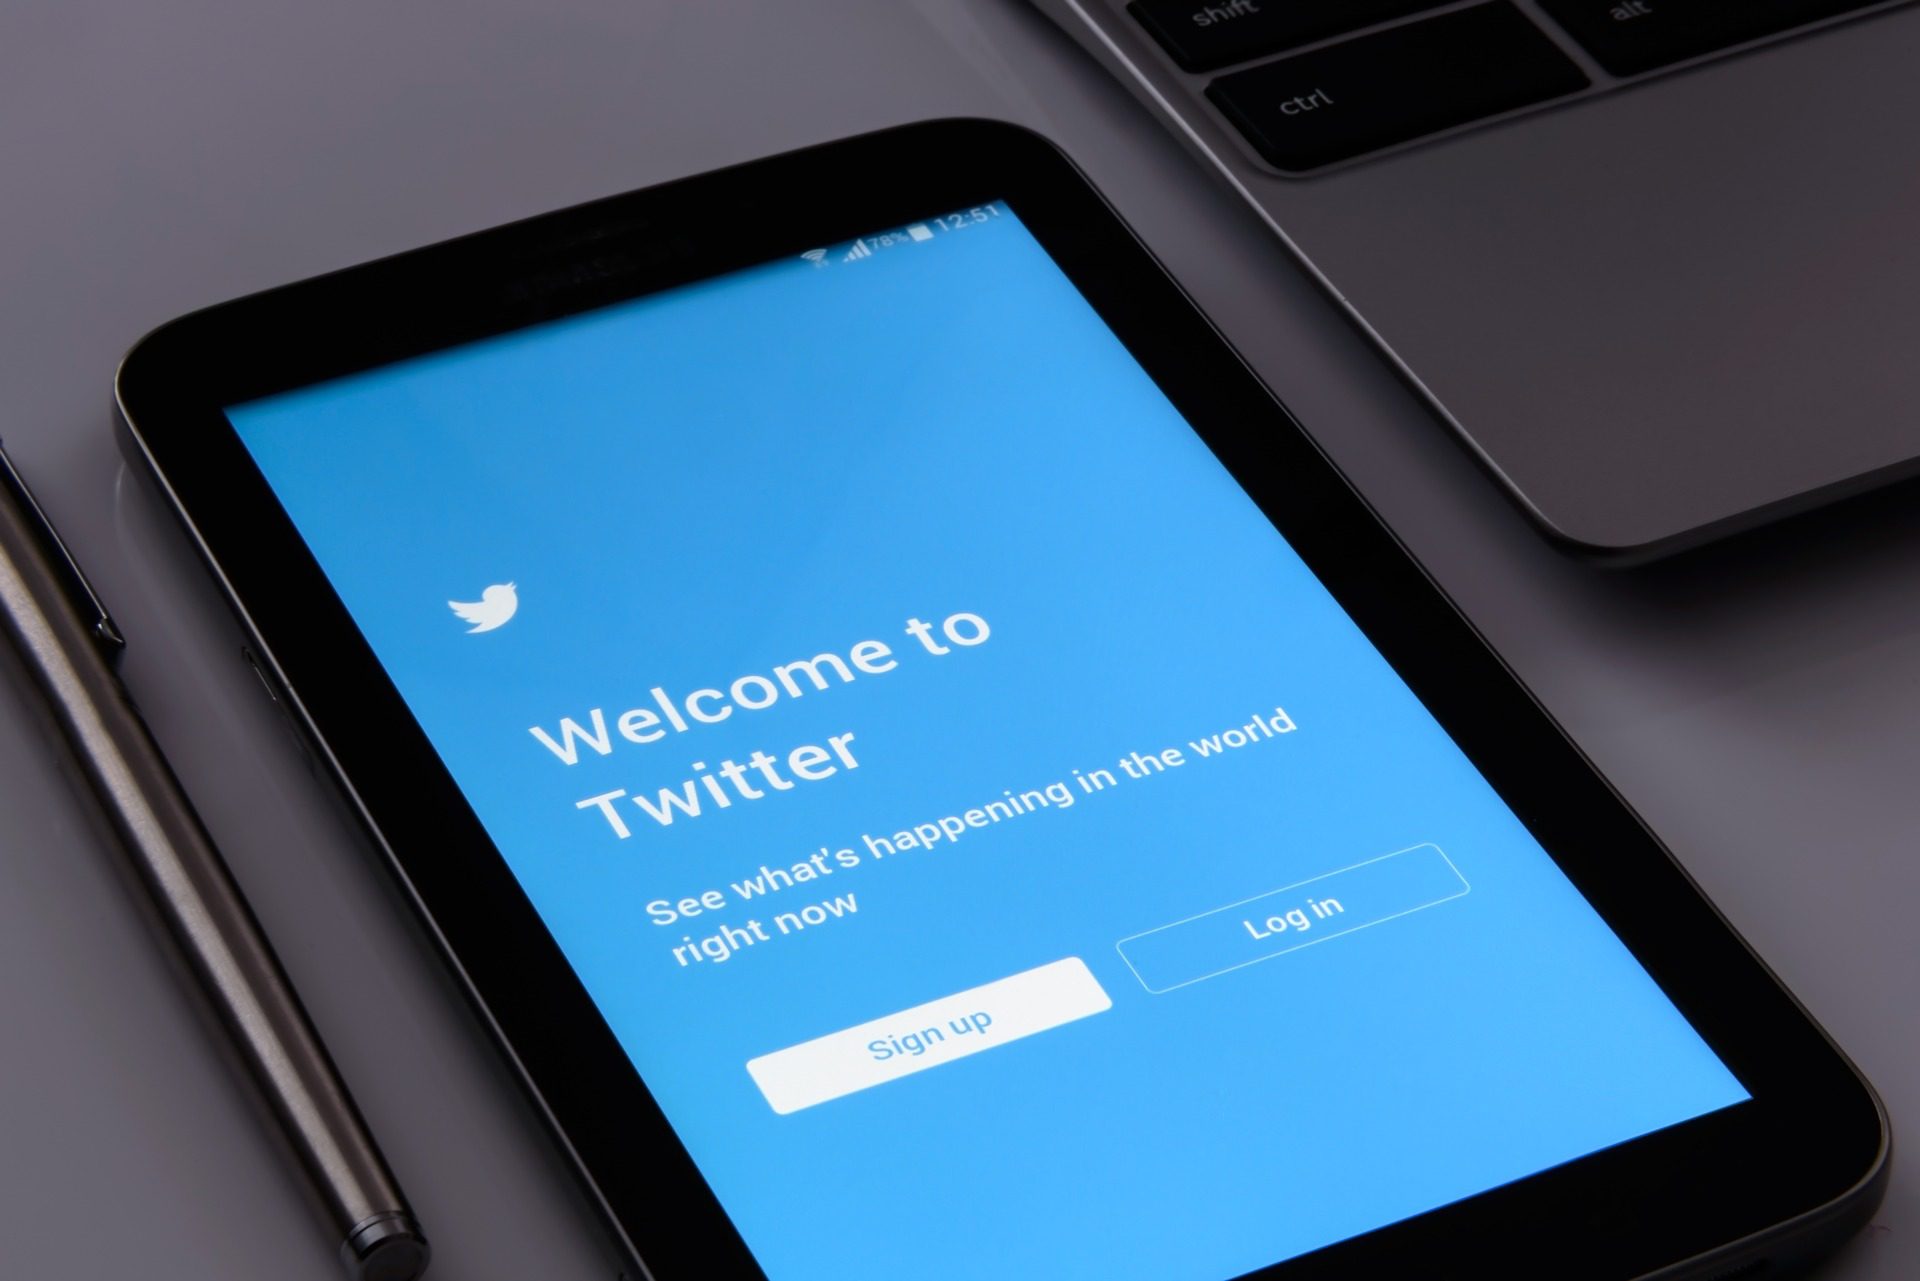 3 Ways To Market Your Business On Twitter (even if you hate Twitter)